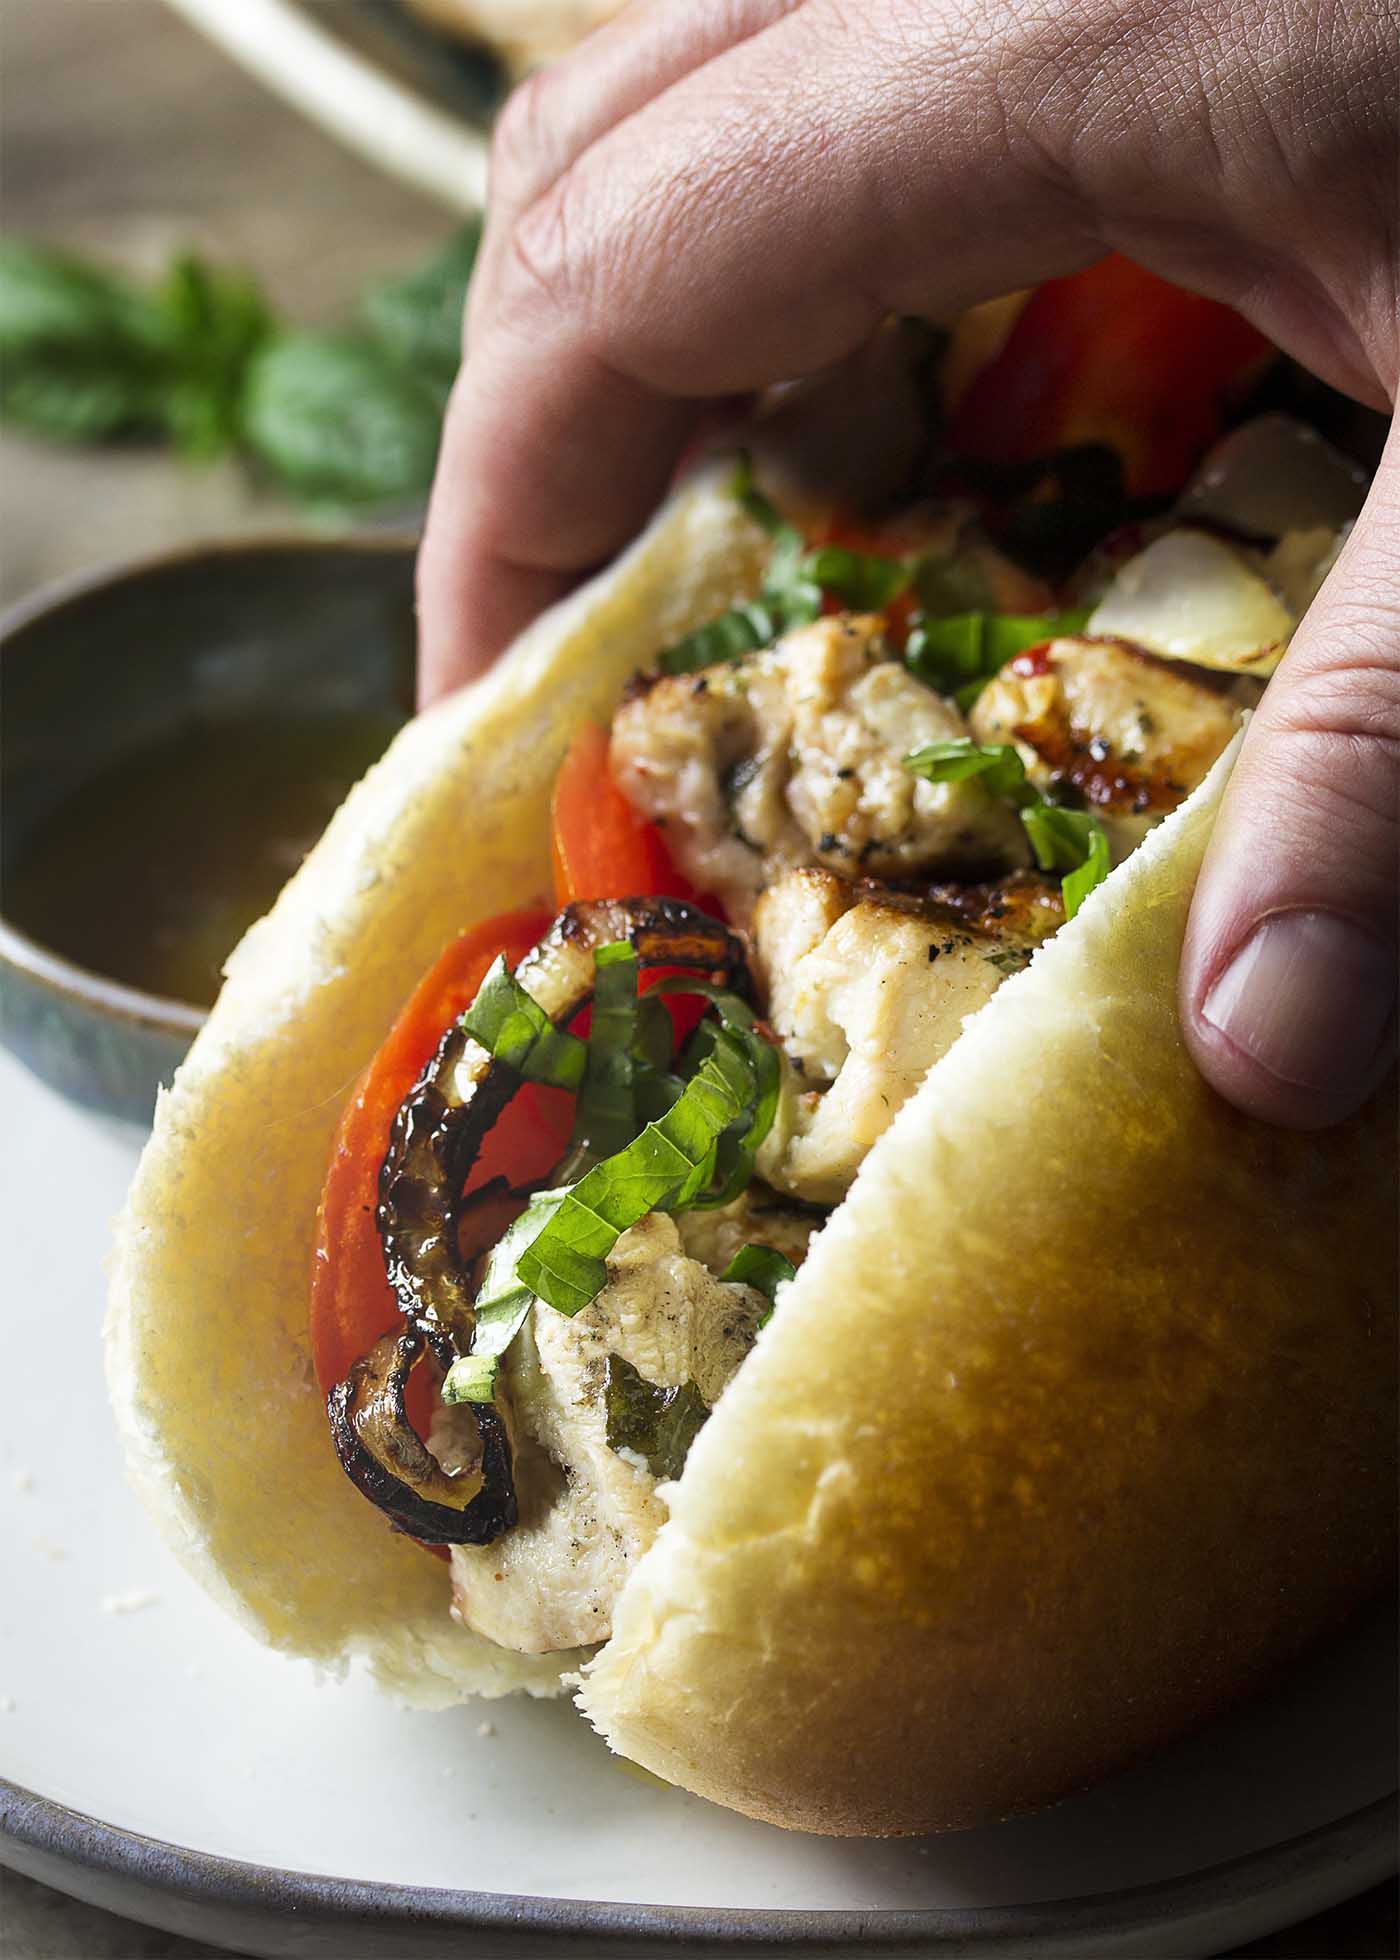 A hand lifting a bun filled with grilled chicken, onions, and tomatoes off a plate.